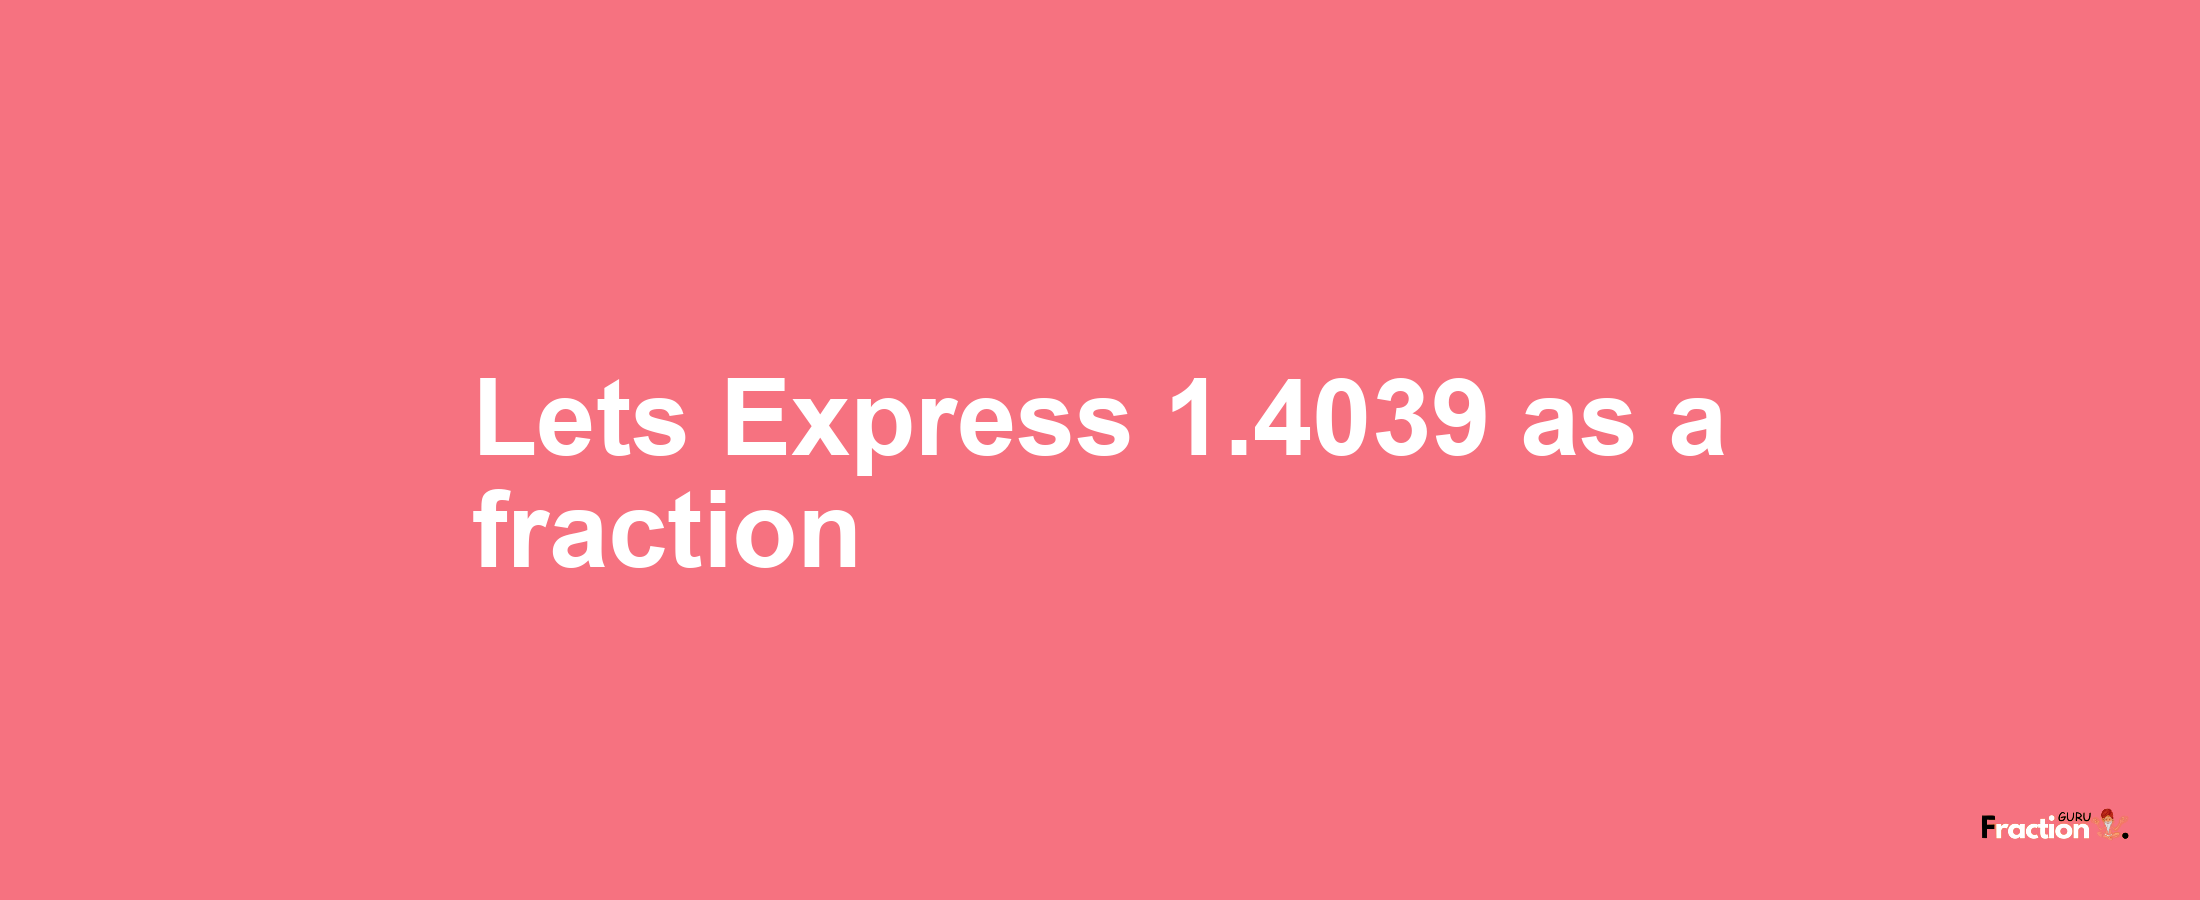 Lets Express 1.4039 as afraction